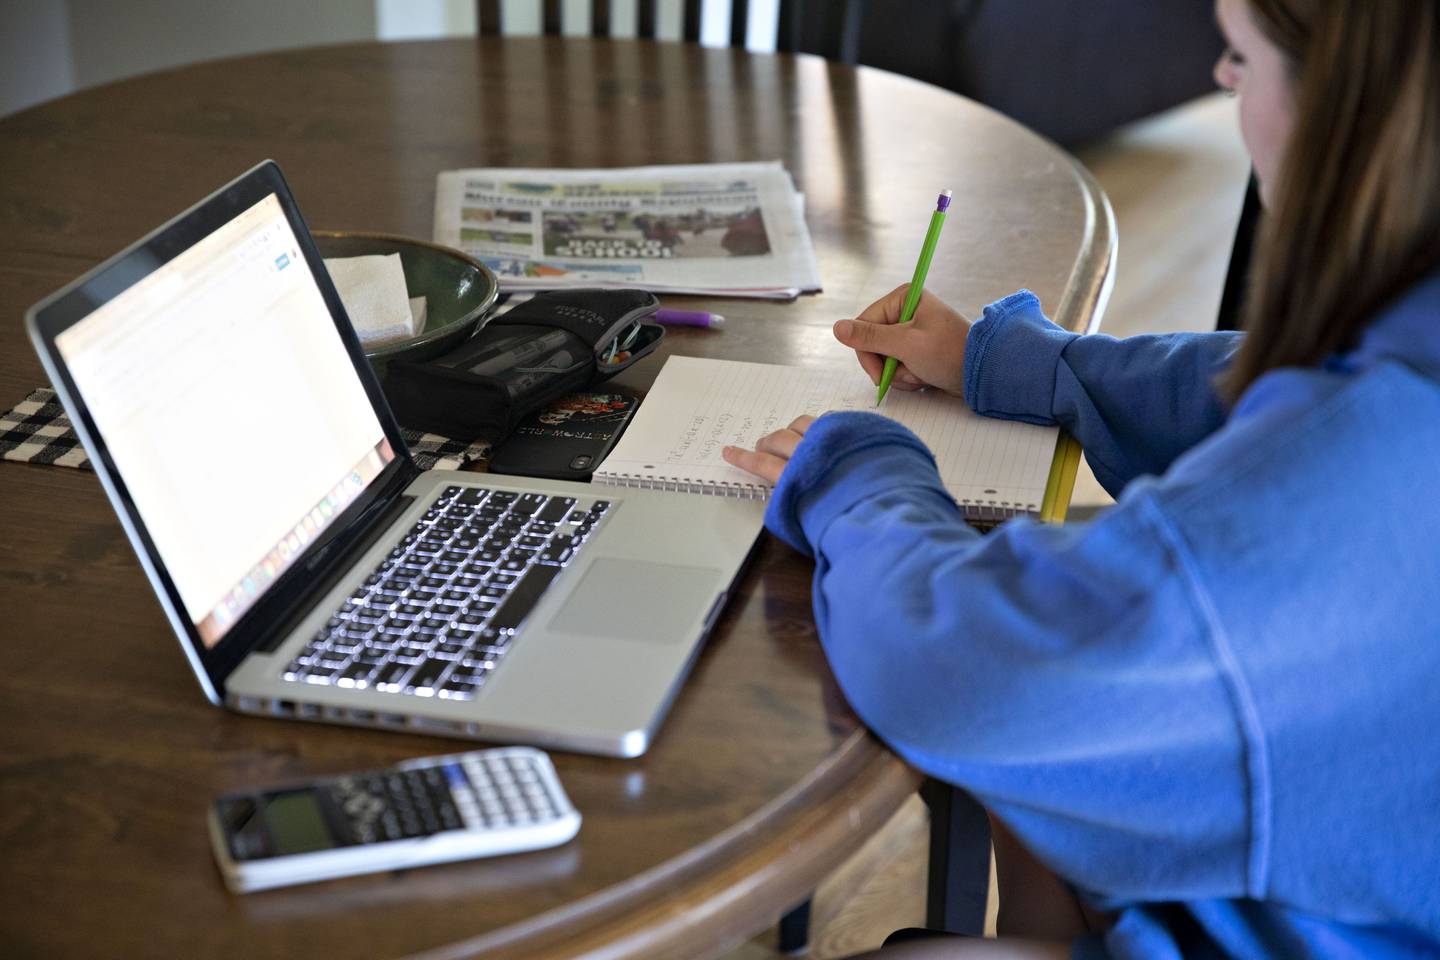 A student works on a laptop computer at home during a remote learning day.